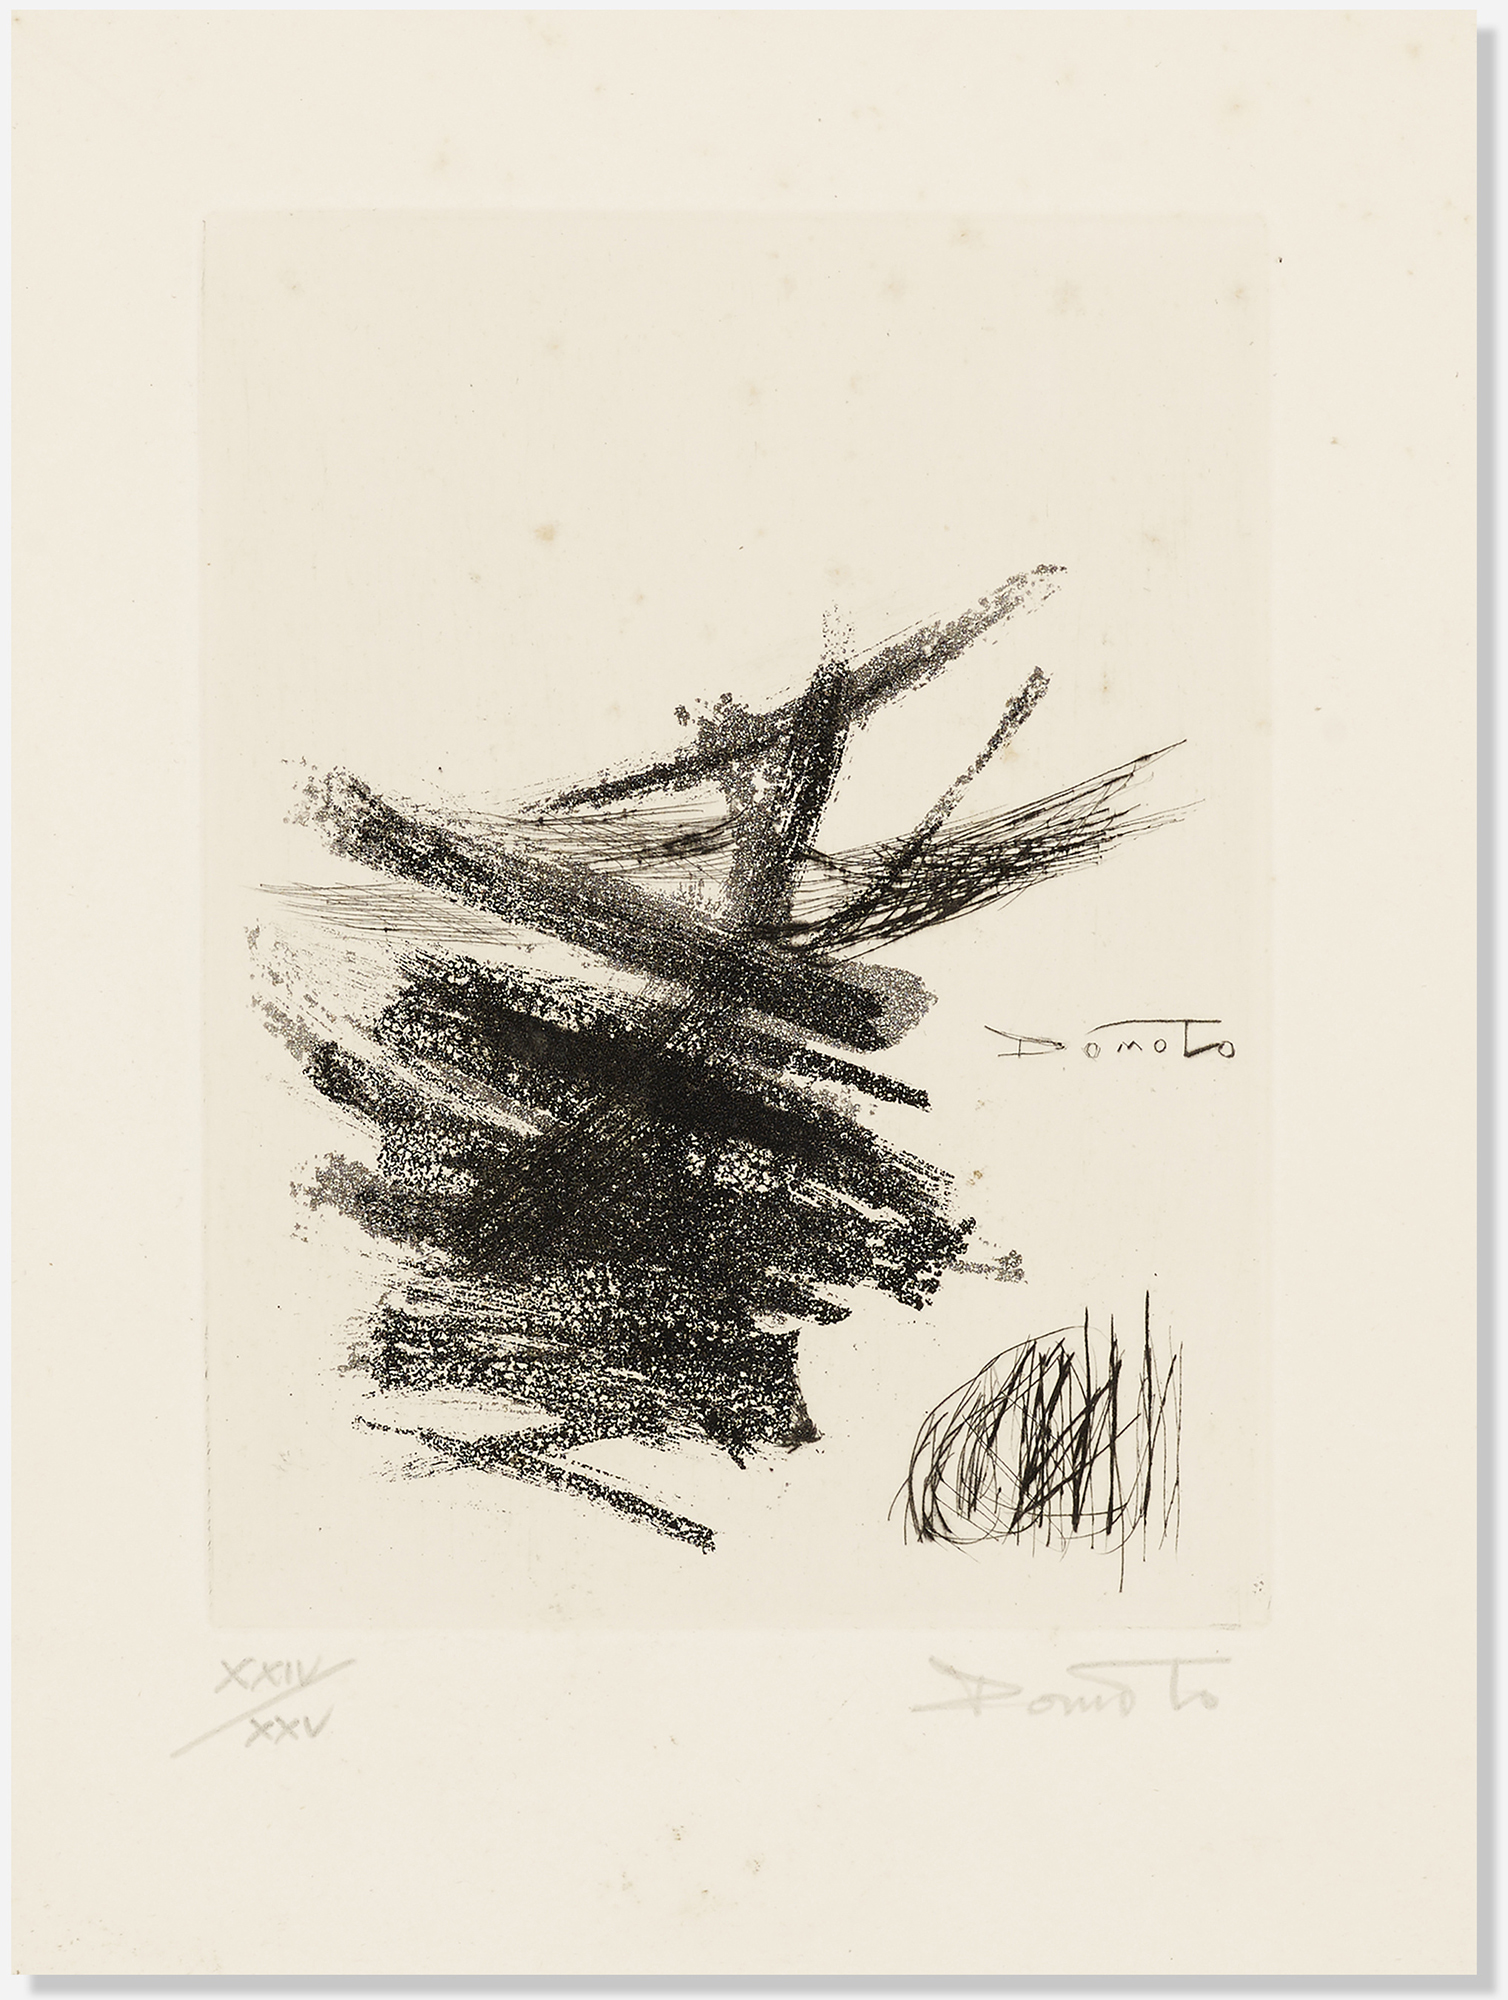 Untitled IV (from The International Avant-Garde, Vol. 1) by Hisao Domoto